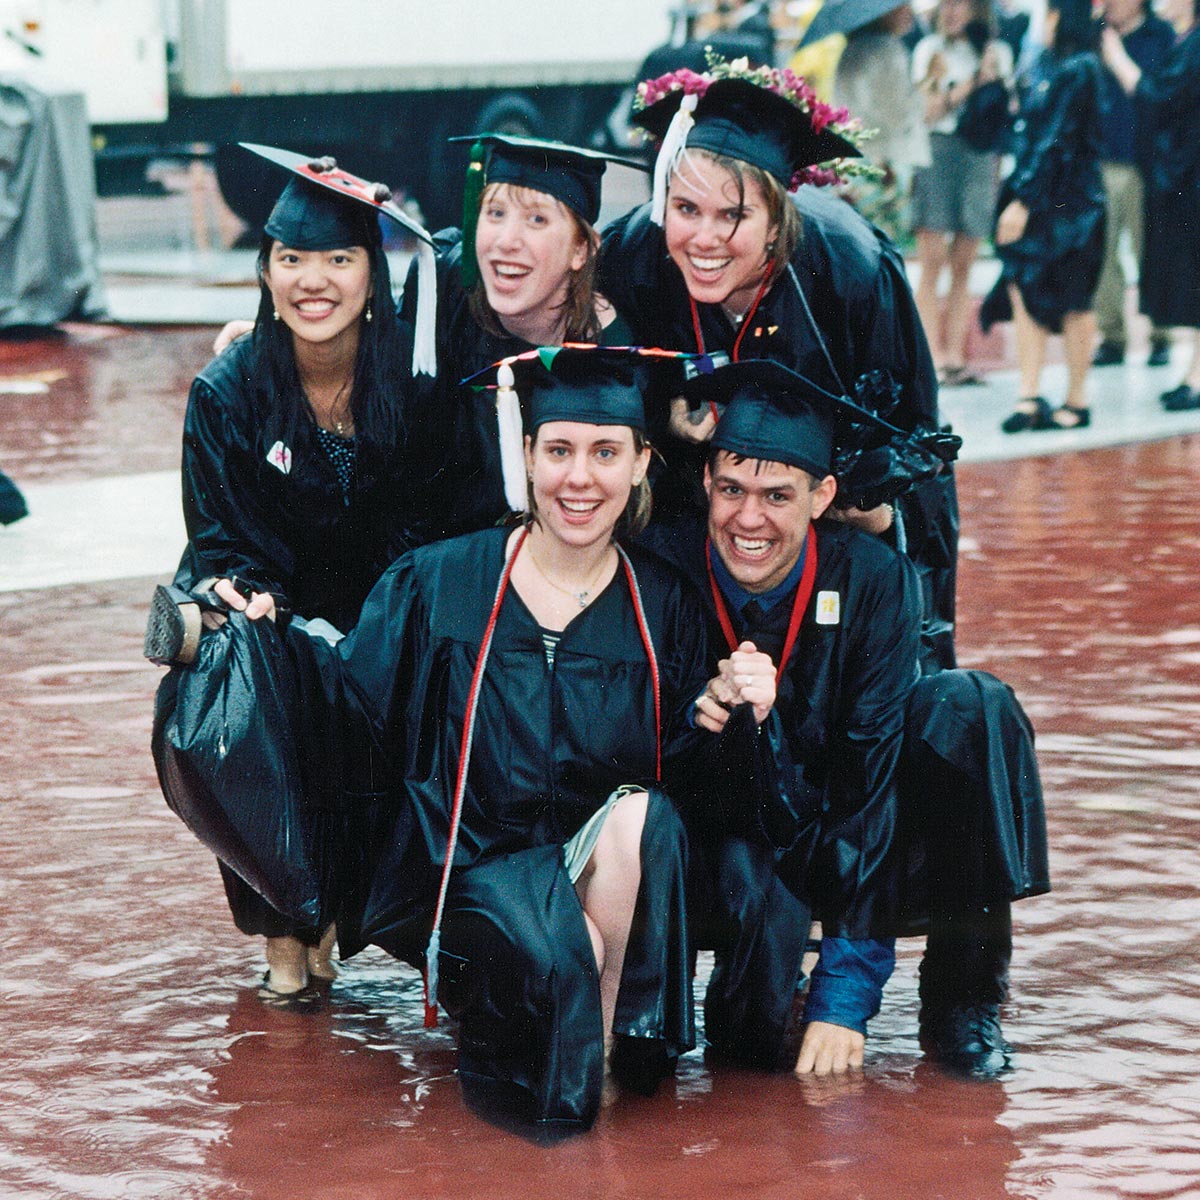 Five people in caps and gowns pose together in several inches of standing water.